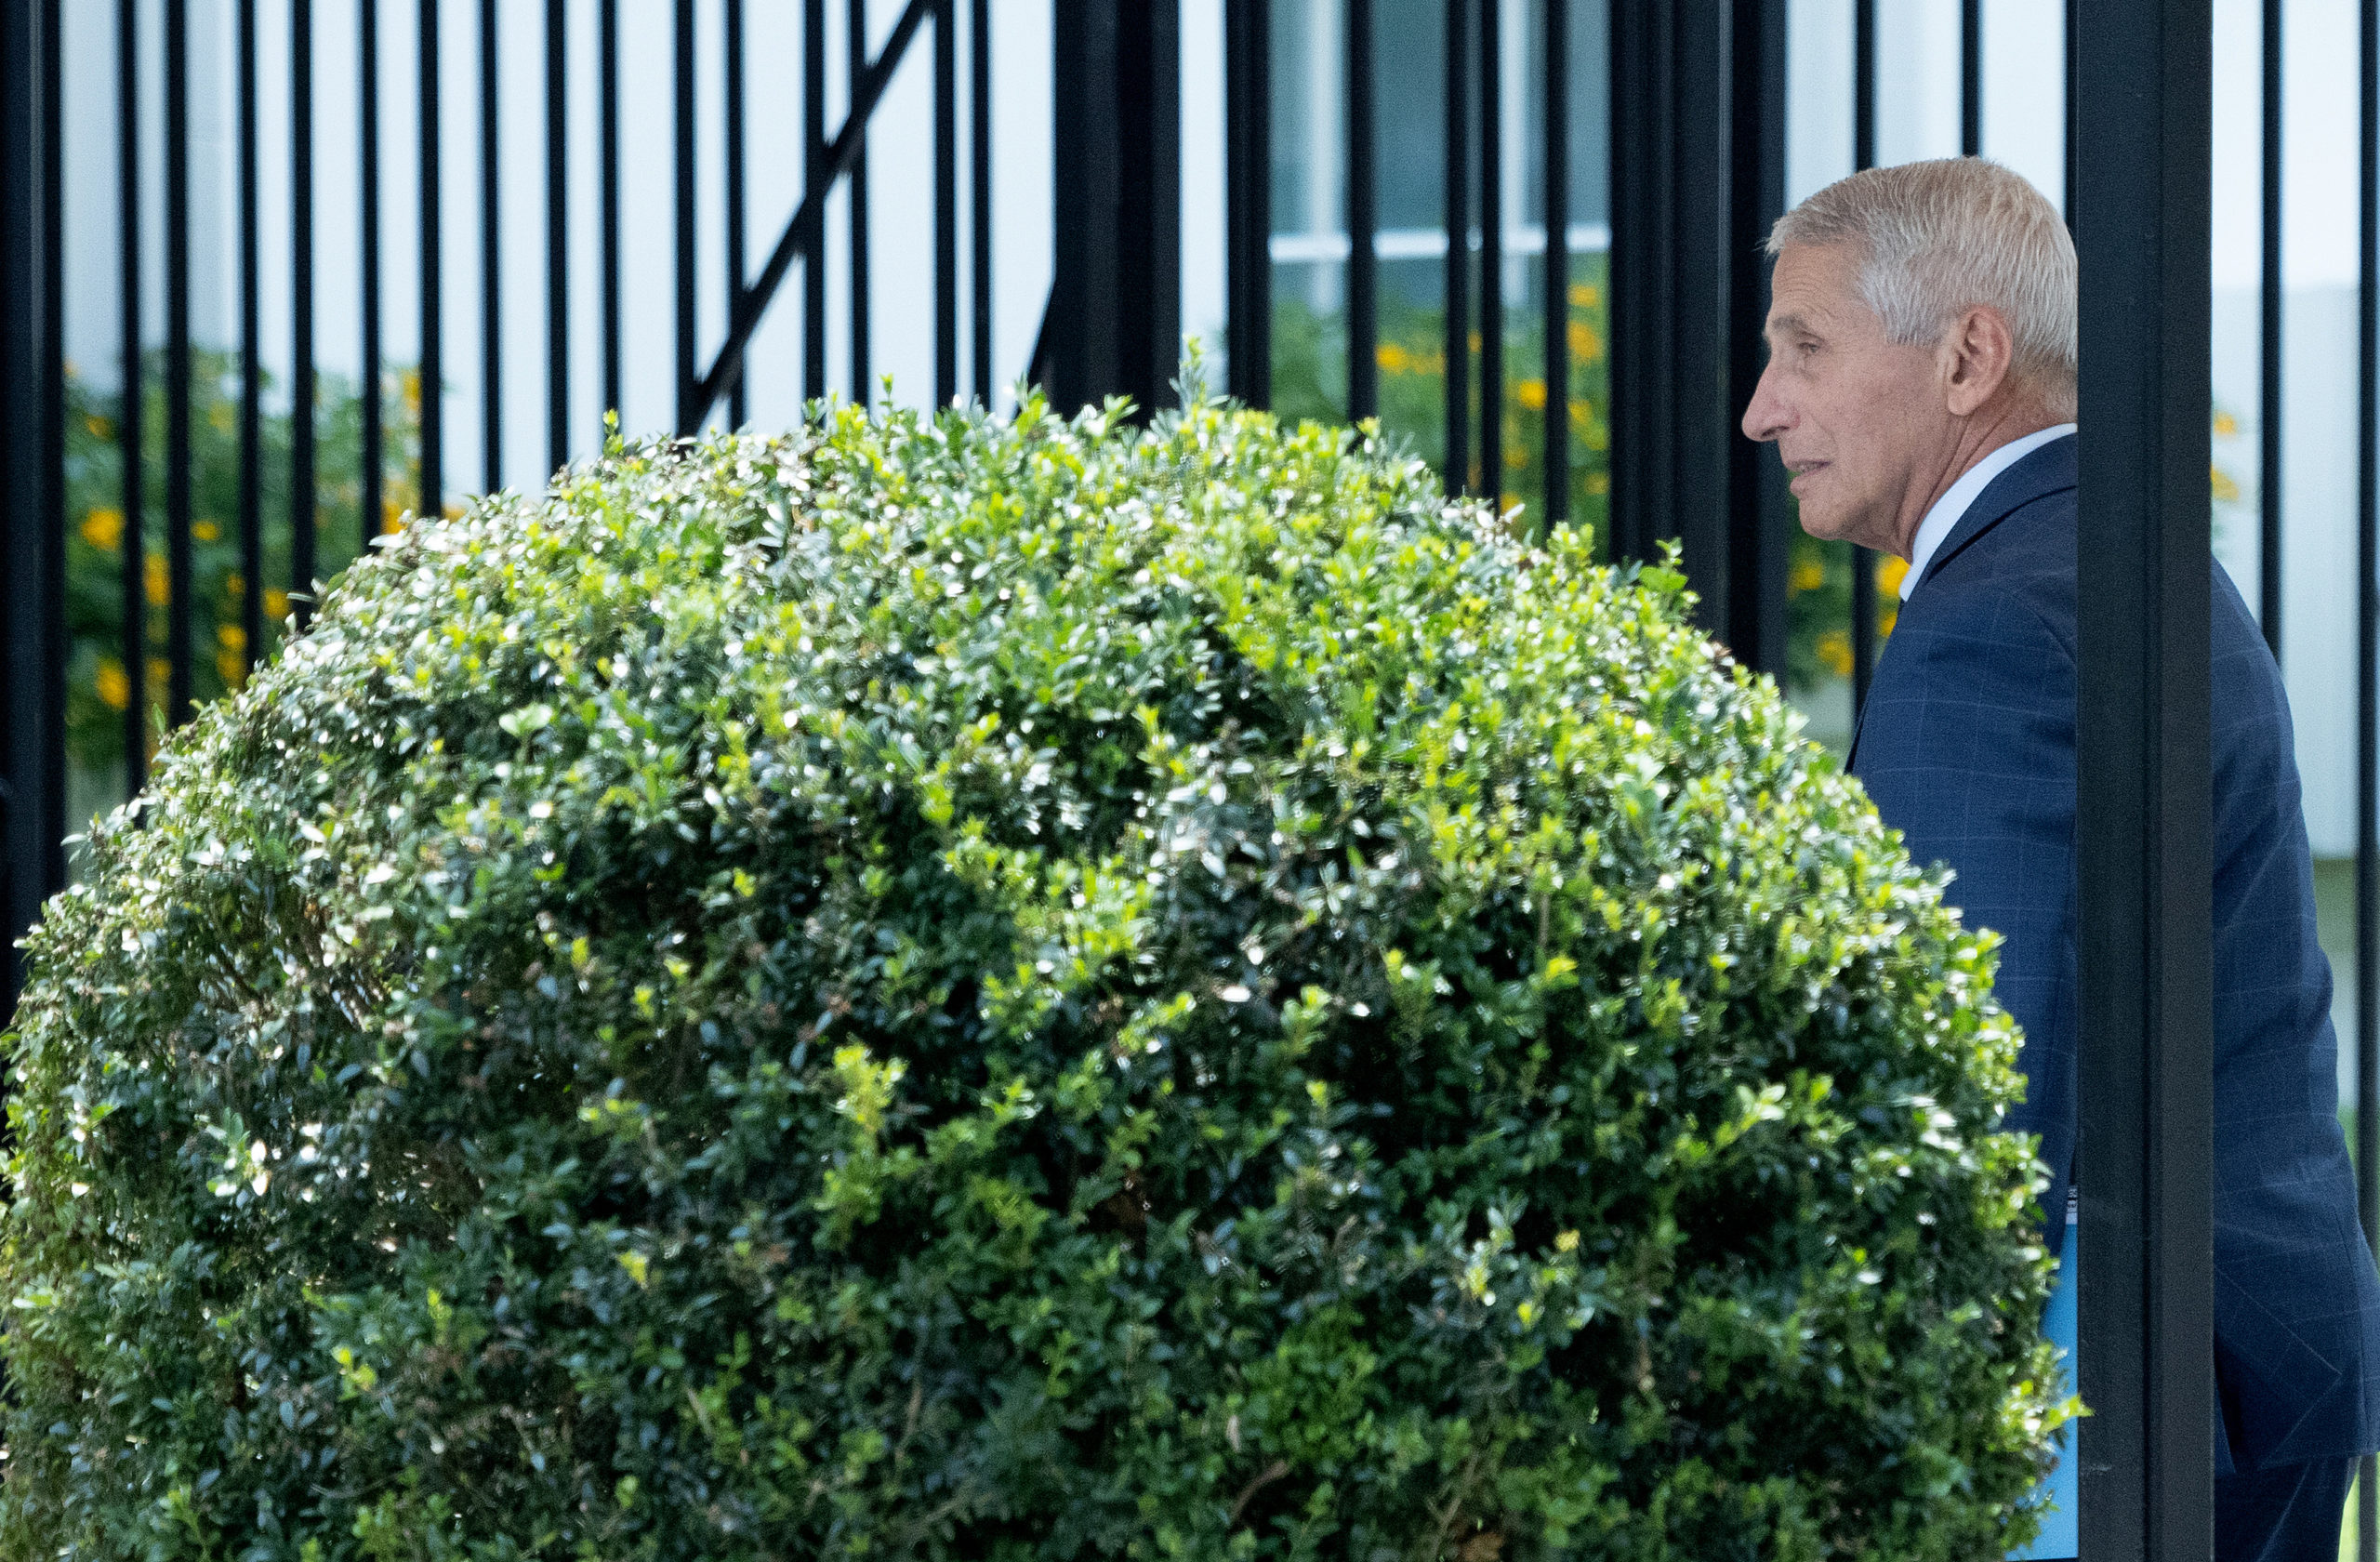 WASHINGTON, DC - JULY 22: Dr. Anthony Fauci, chief medical advisor to the President, arrives at the White House on July 22, 2021 in Washington, DC. The United States continues to see an increase in COVID-19 cases as the Delta variant accounts for a larger share of new cases. (Photo by Win McNamee/Getty Images)